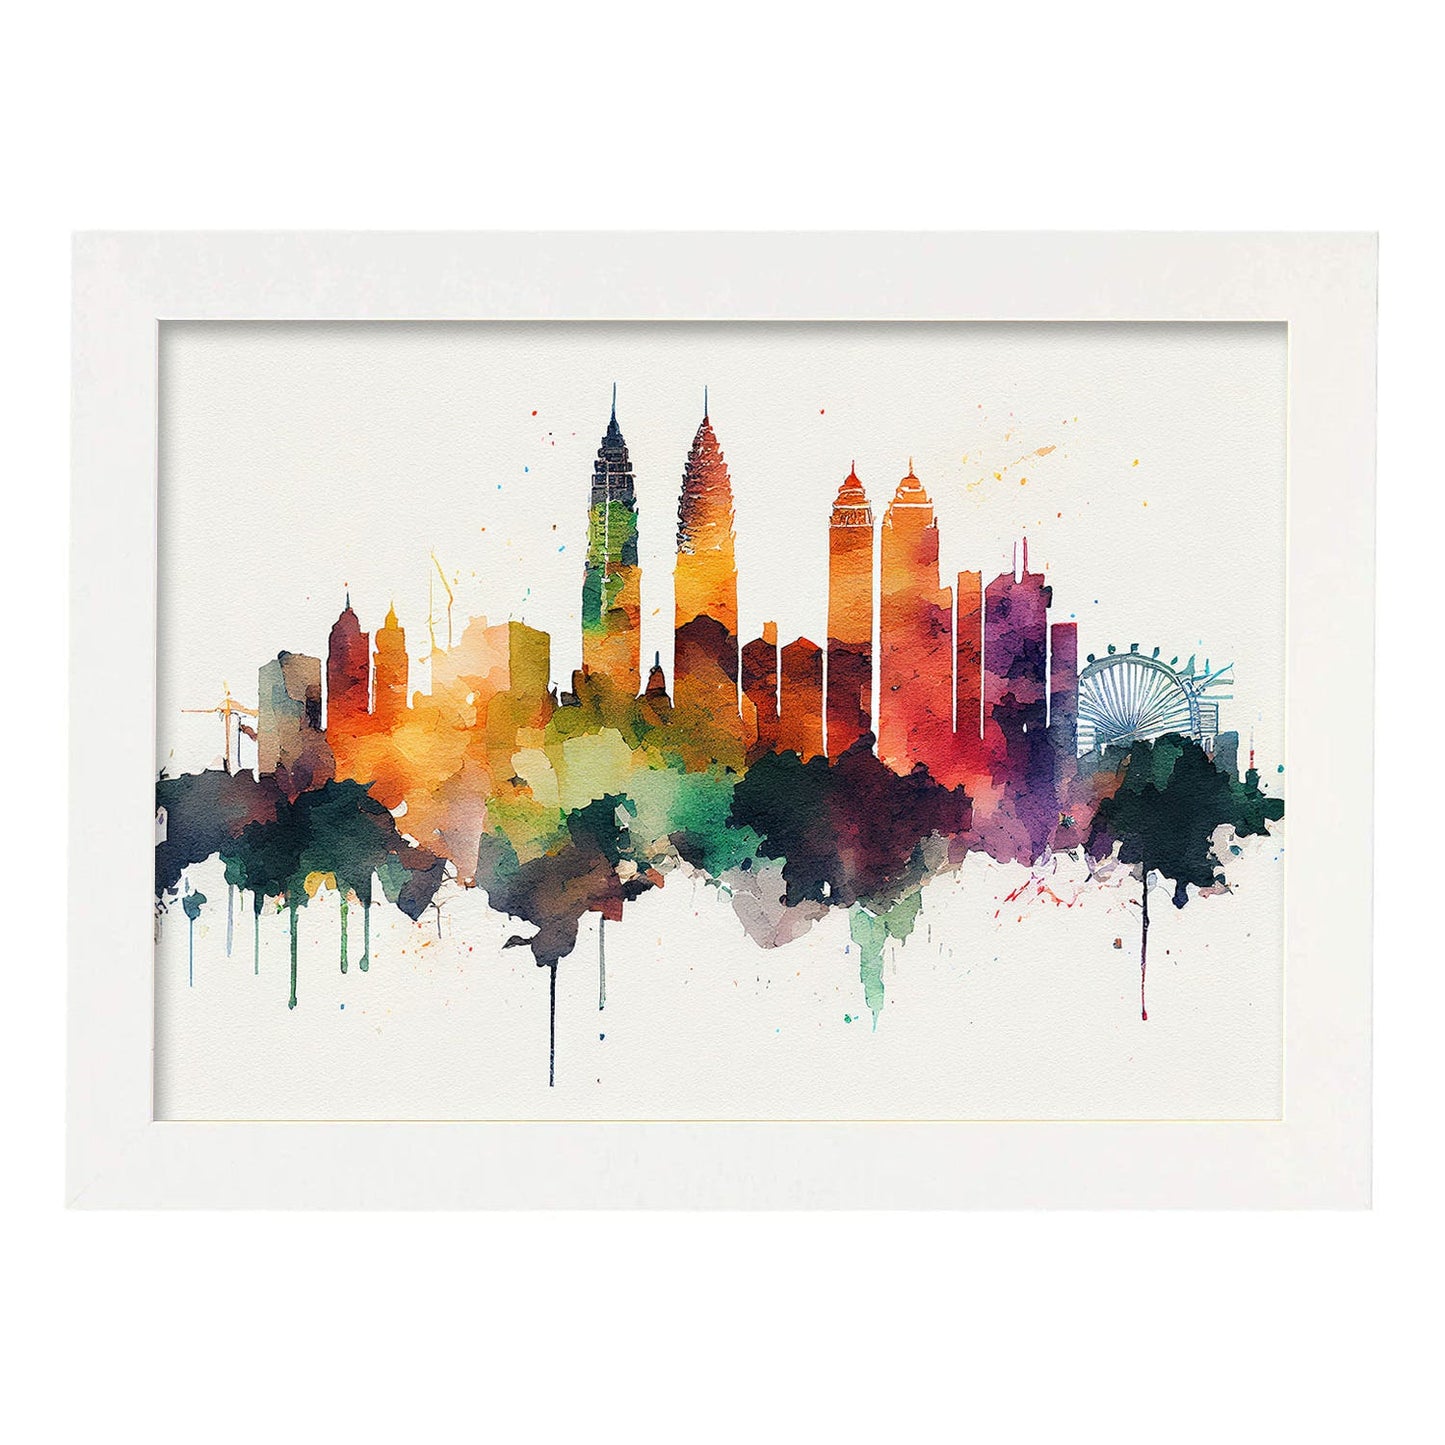 Nacnic watercolor of a skyline of the city of Kuala Lumpur_3. Aesthetic Wall Art Prints for Bedroom or Living Room Design.-Artwork-Nacnic-A4-Marco Blanco-Nacnic Estudio SL